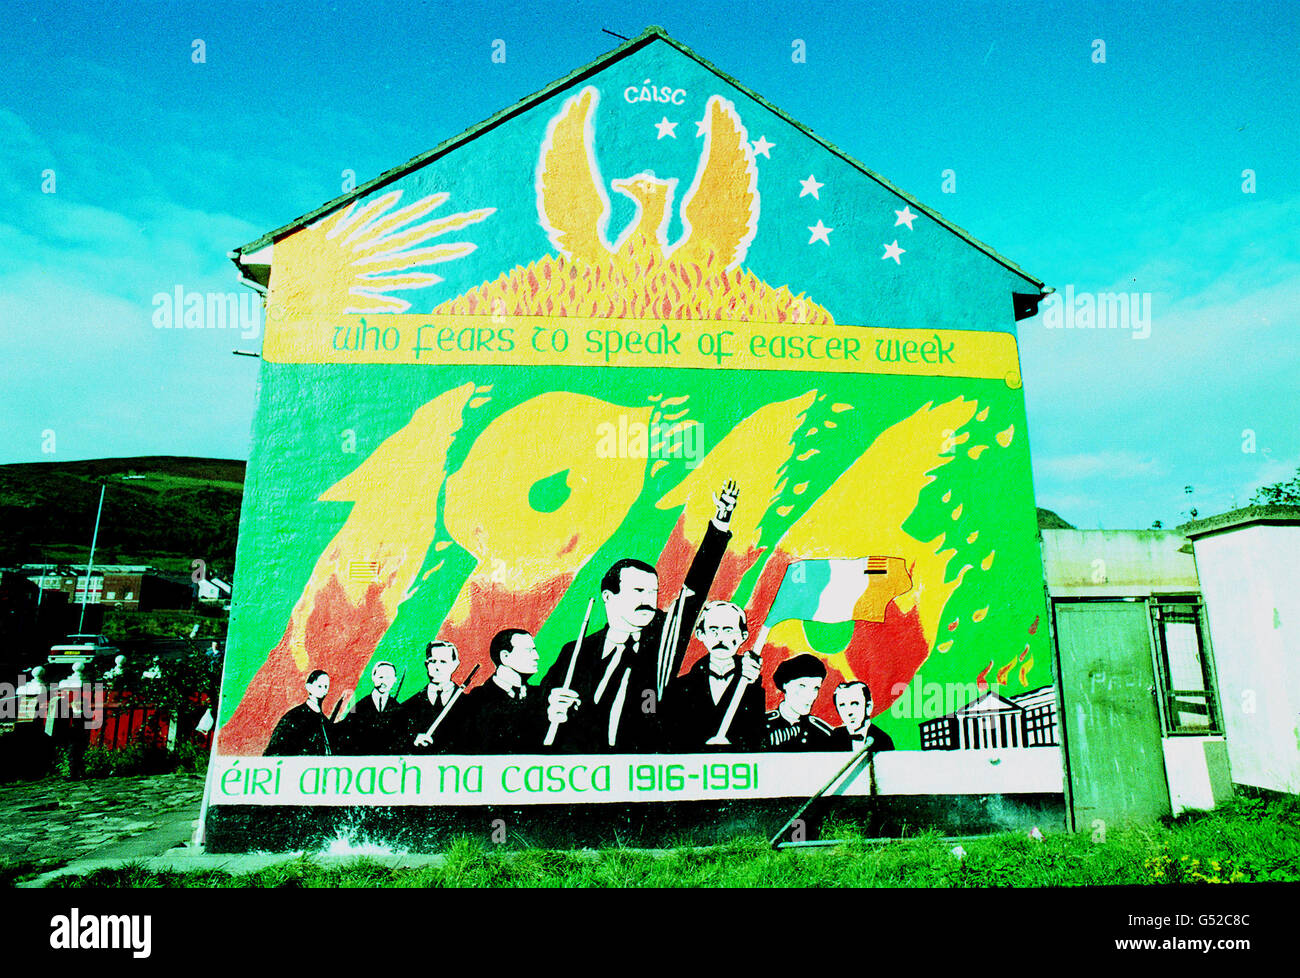 NATIONALIST MURAL IN BELFAST: The Gaelic language features on a Republican mural commemorating the 1916 Easter Rising against the British in Dublin. Stock Photo